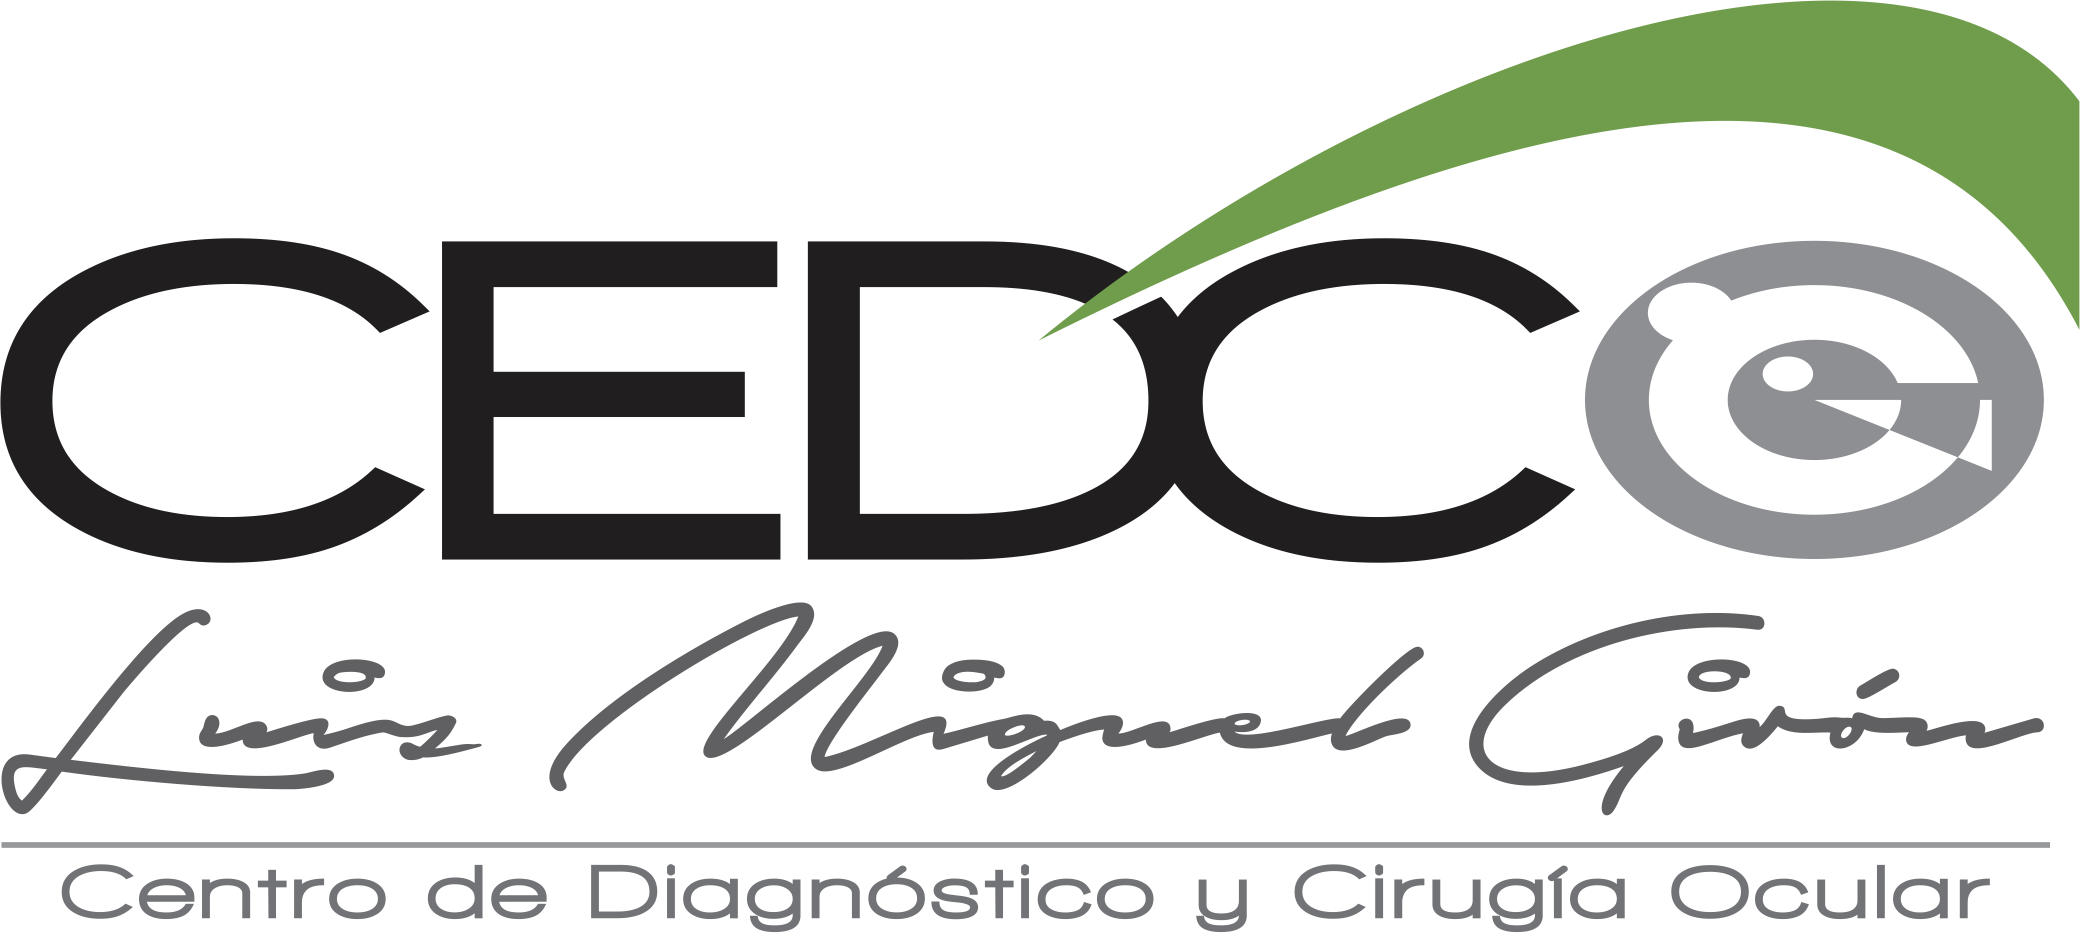 logo---cedco.png